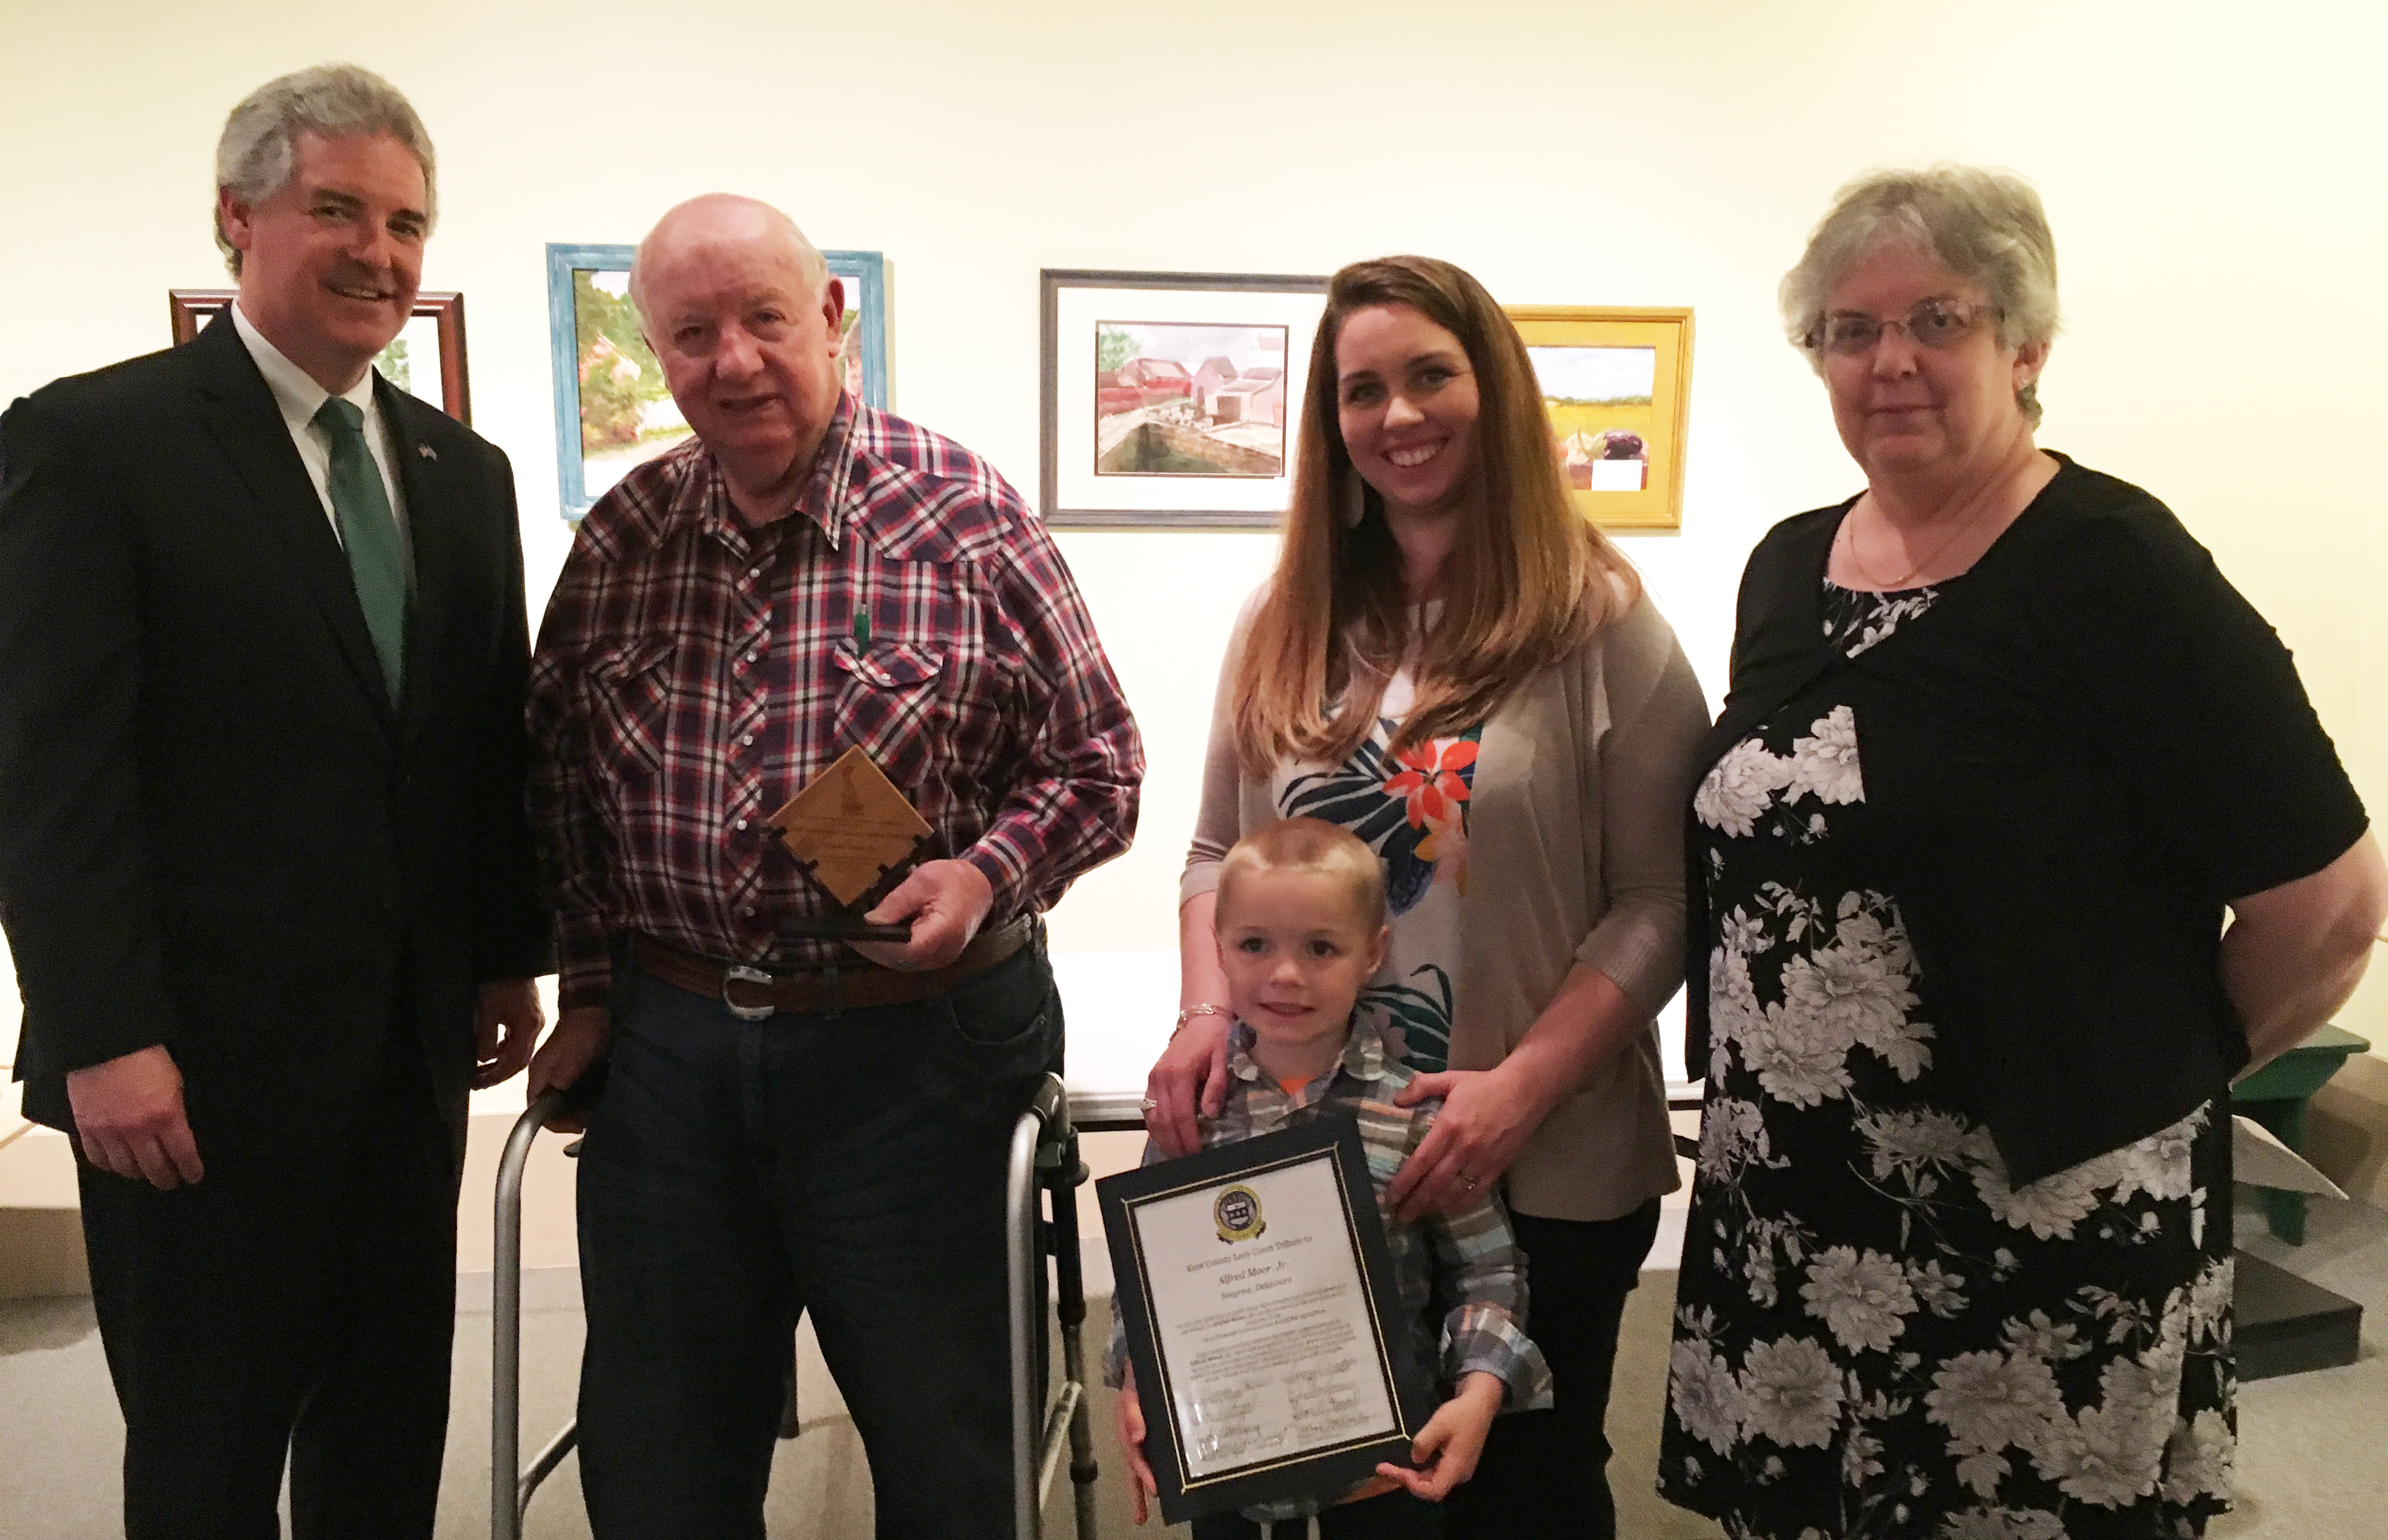 DNREC Secretary Shawn M. Garvin congratulates Kent County Agricultural Award honoree Alfred Moor Jr. of Smyrna, with his granddaughter-in-law Hallie Moor, great-grandson Everett Moor, and Gail Montgomery.